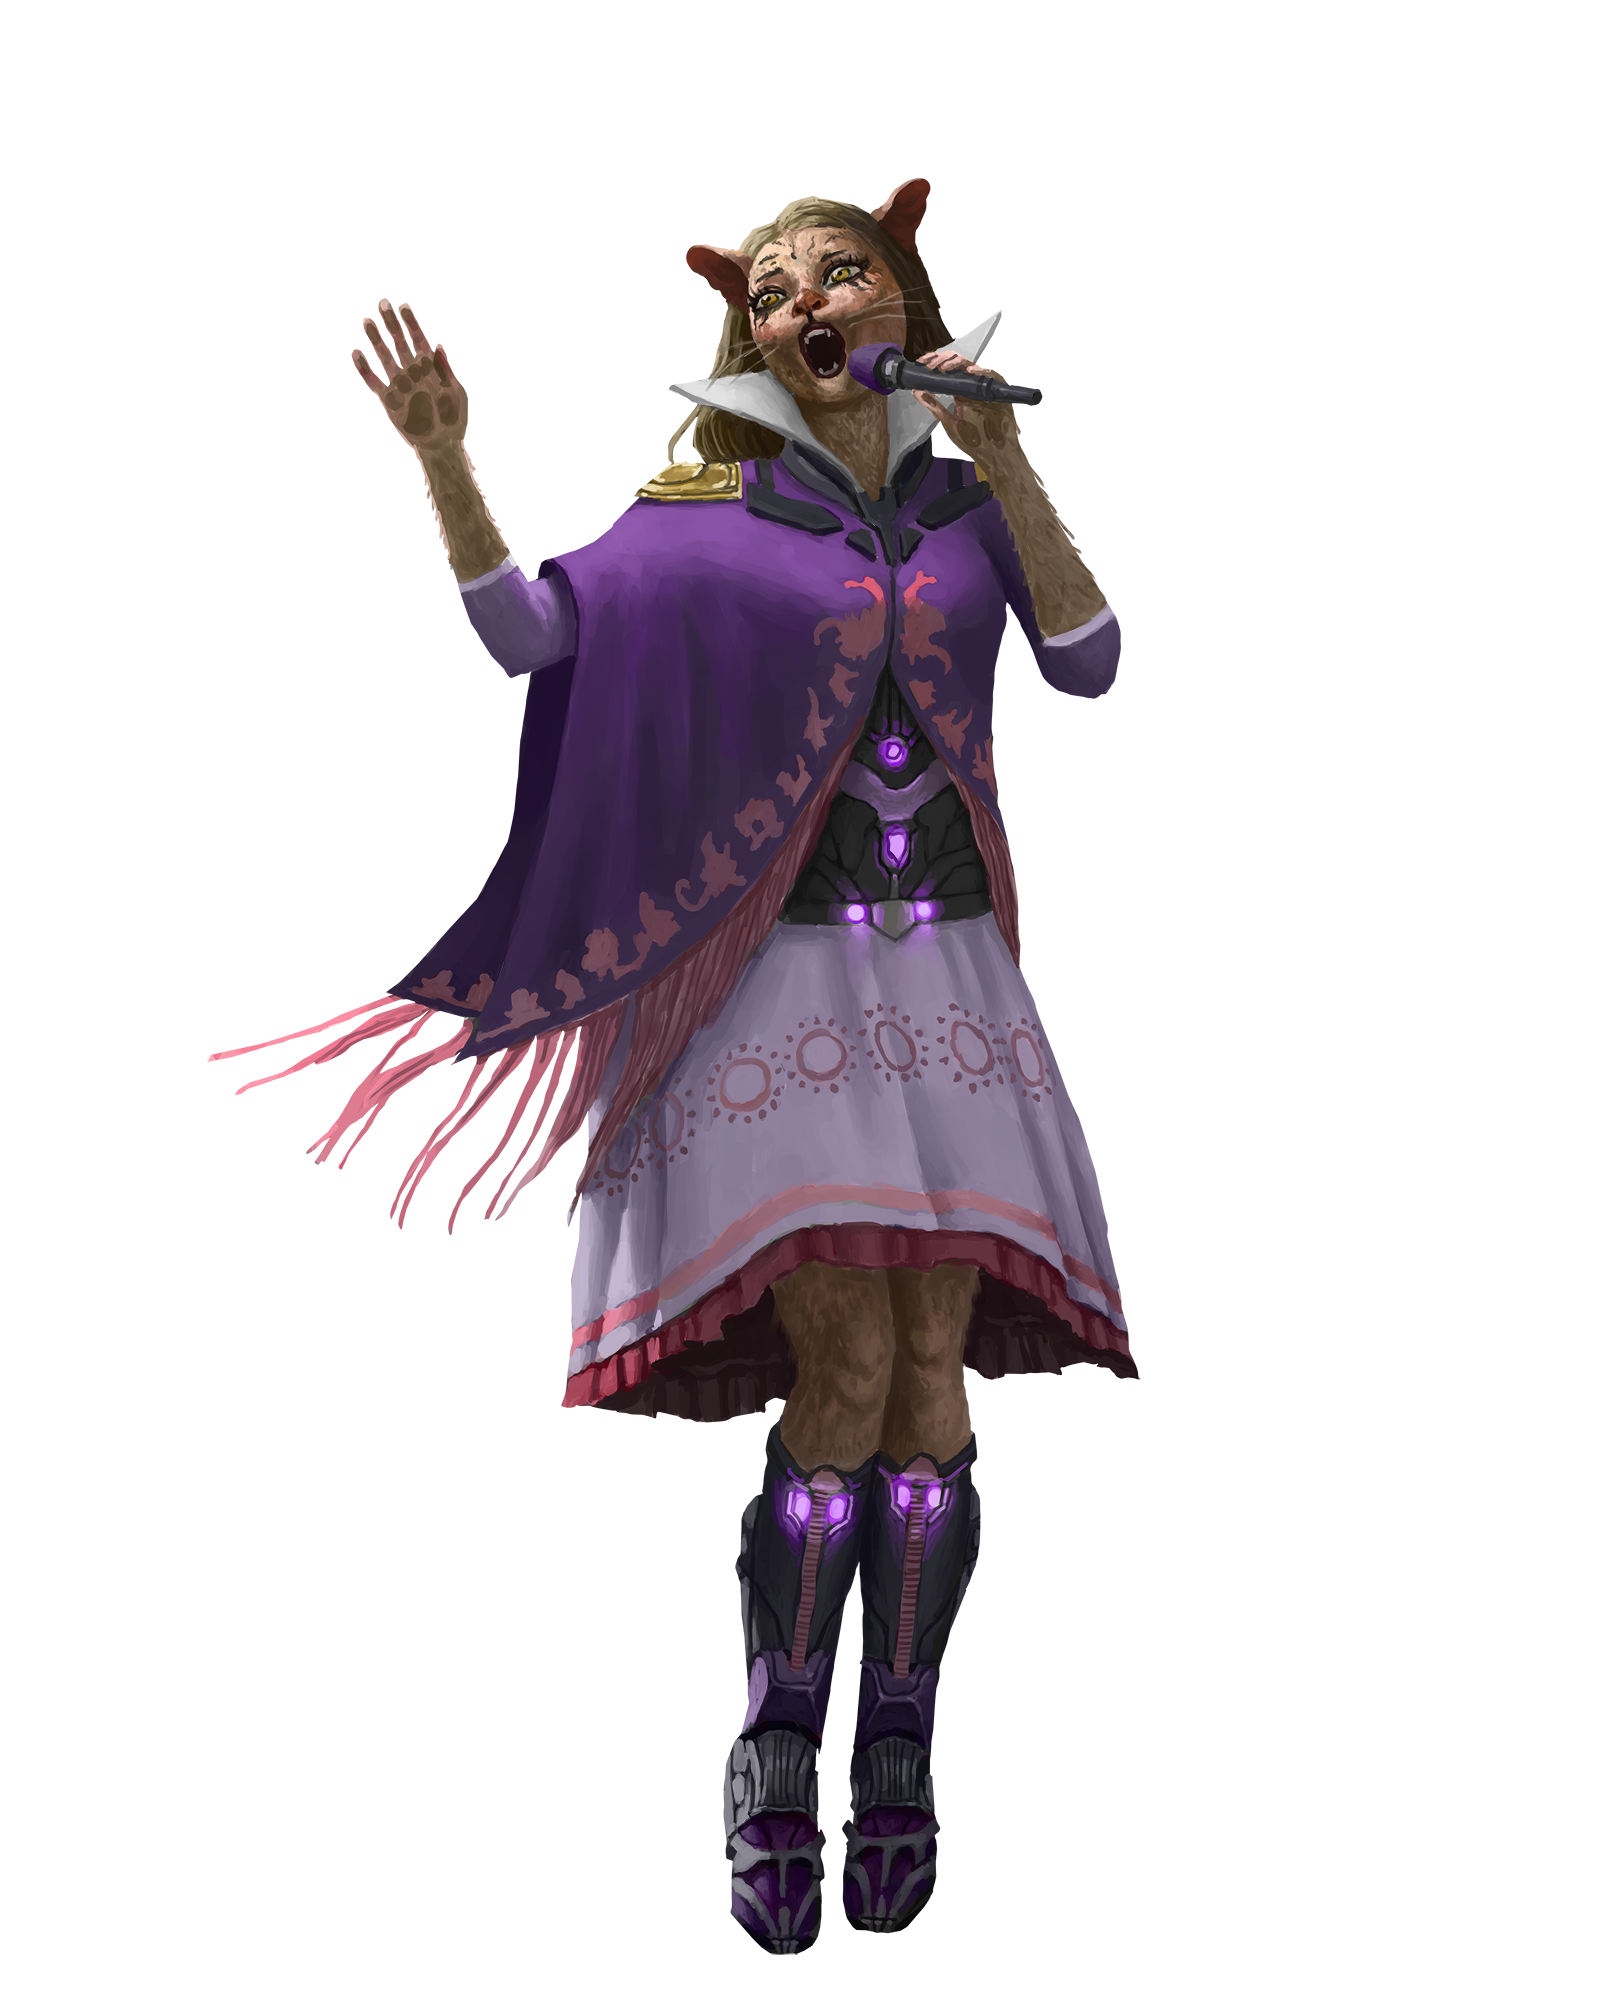 Miiyu, a brown furred catfolk wearing all purple skirt and shawl while sining into a microphones